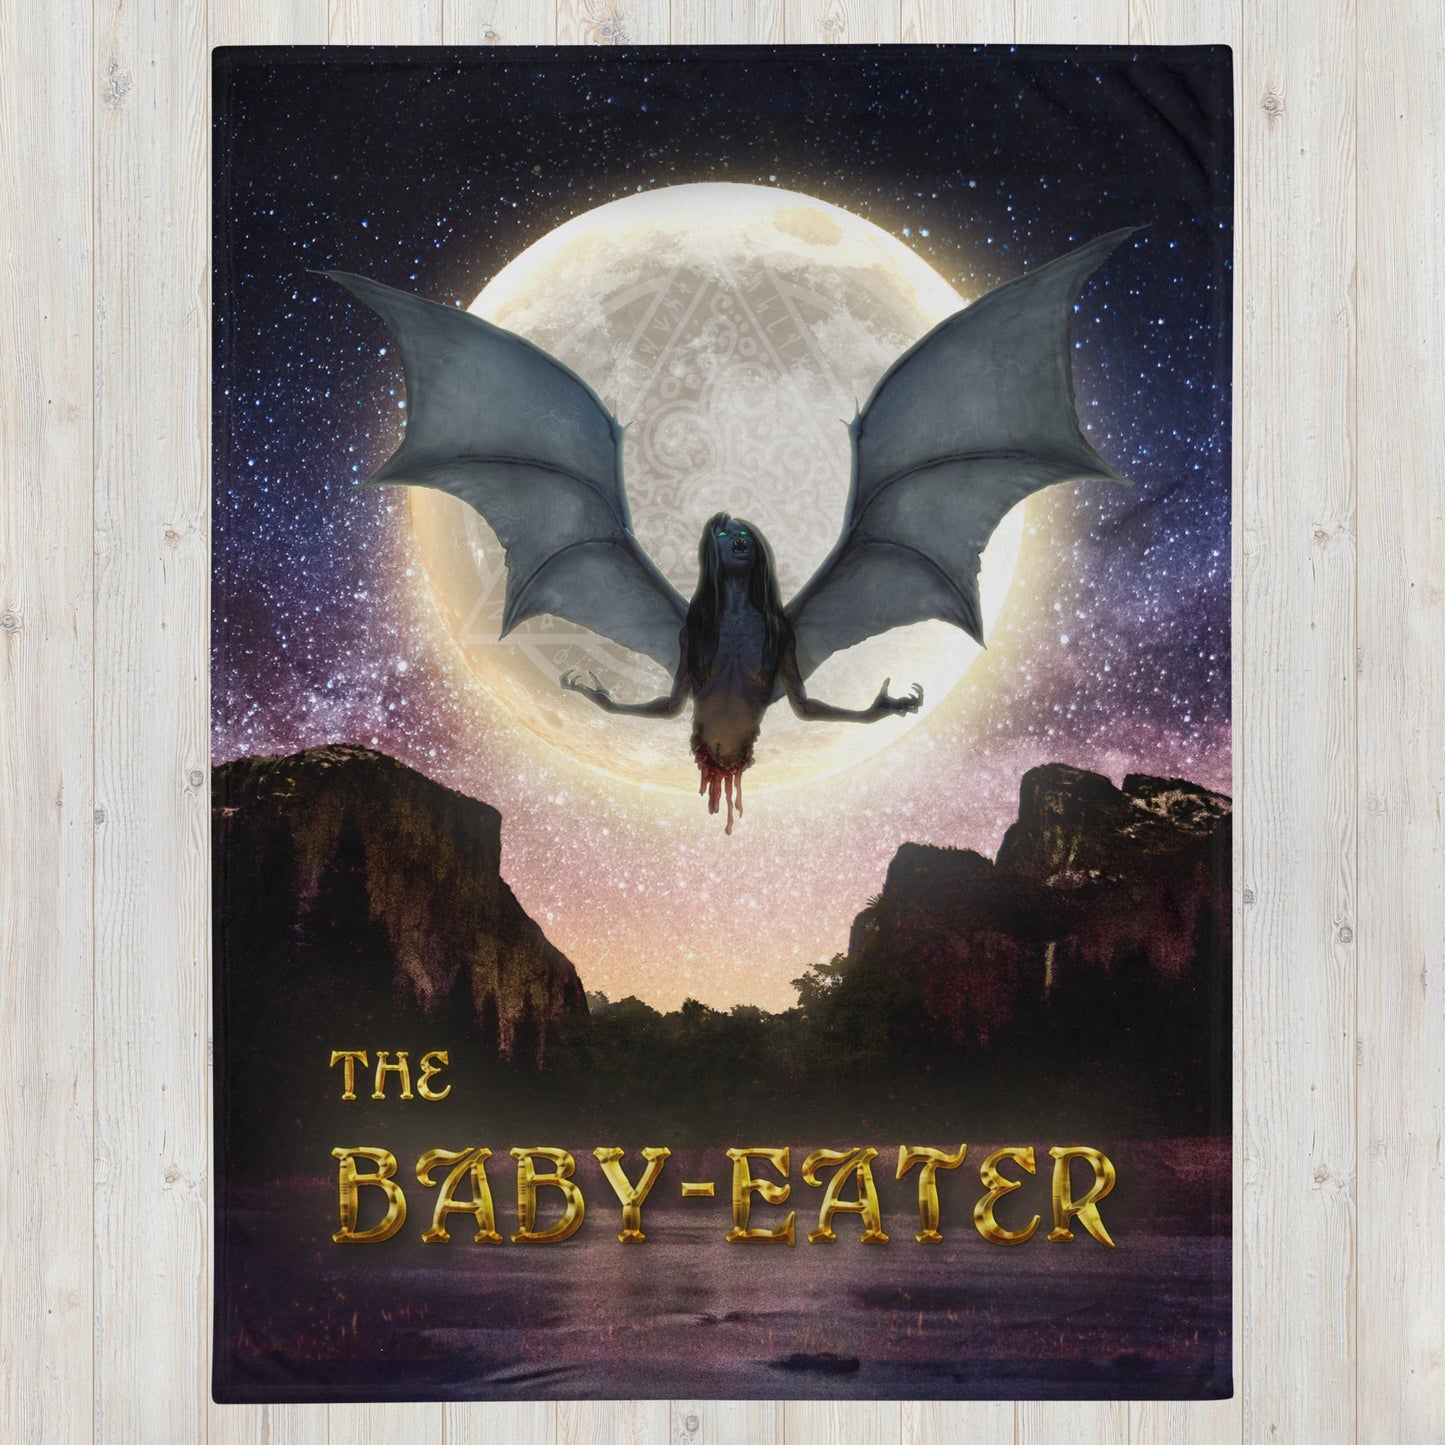 The Baby-Eater Throw Blanket - Embrace the Horror - Spectral Ink Shop - Blanket -1898081_13222